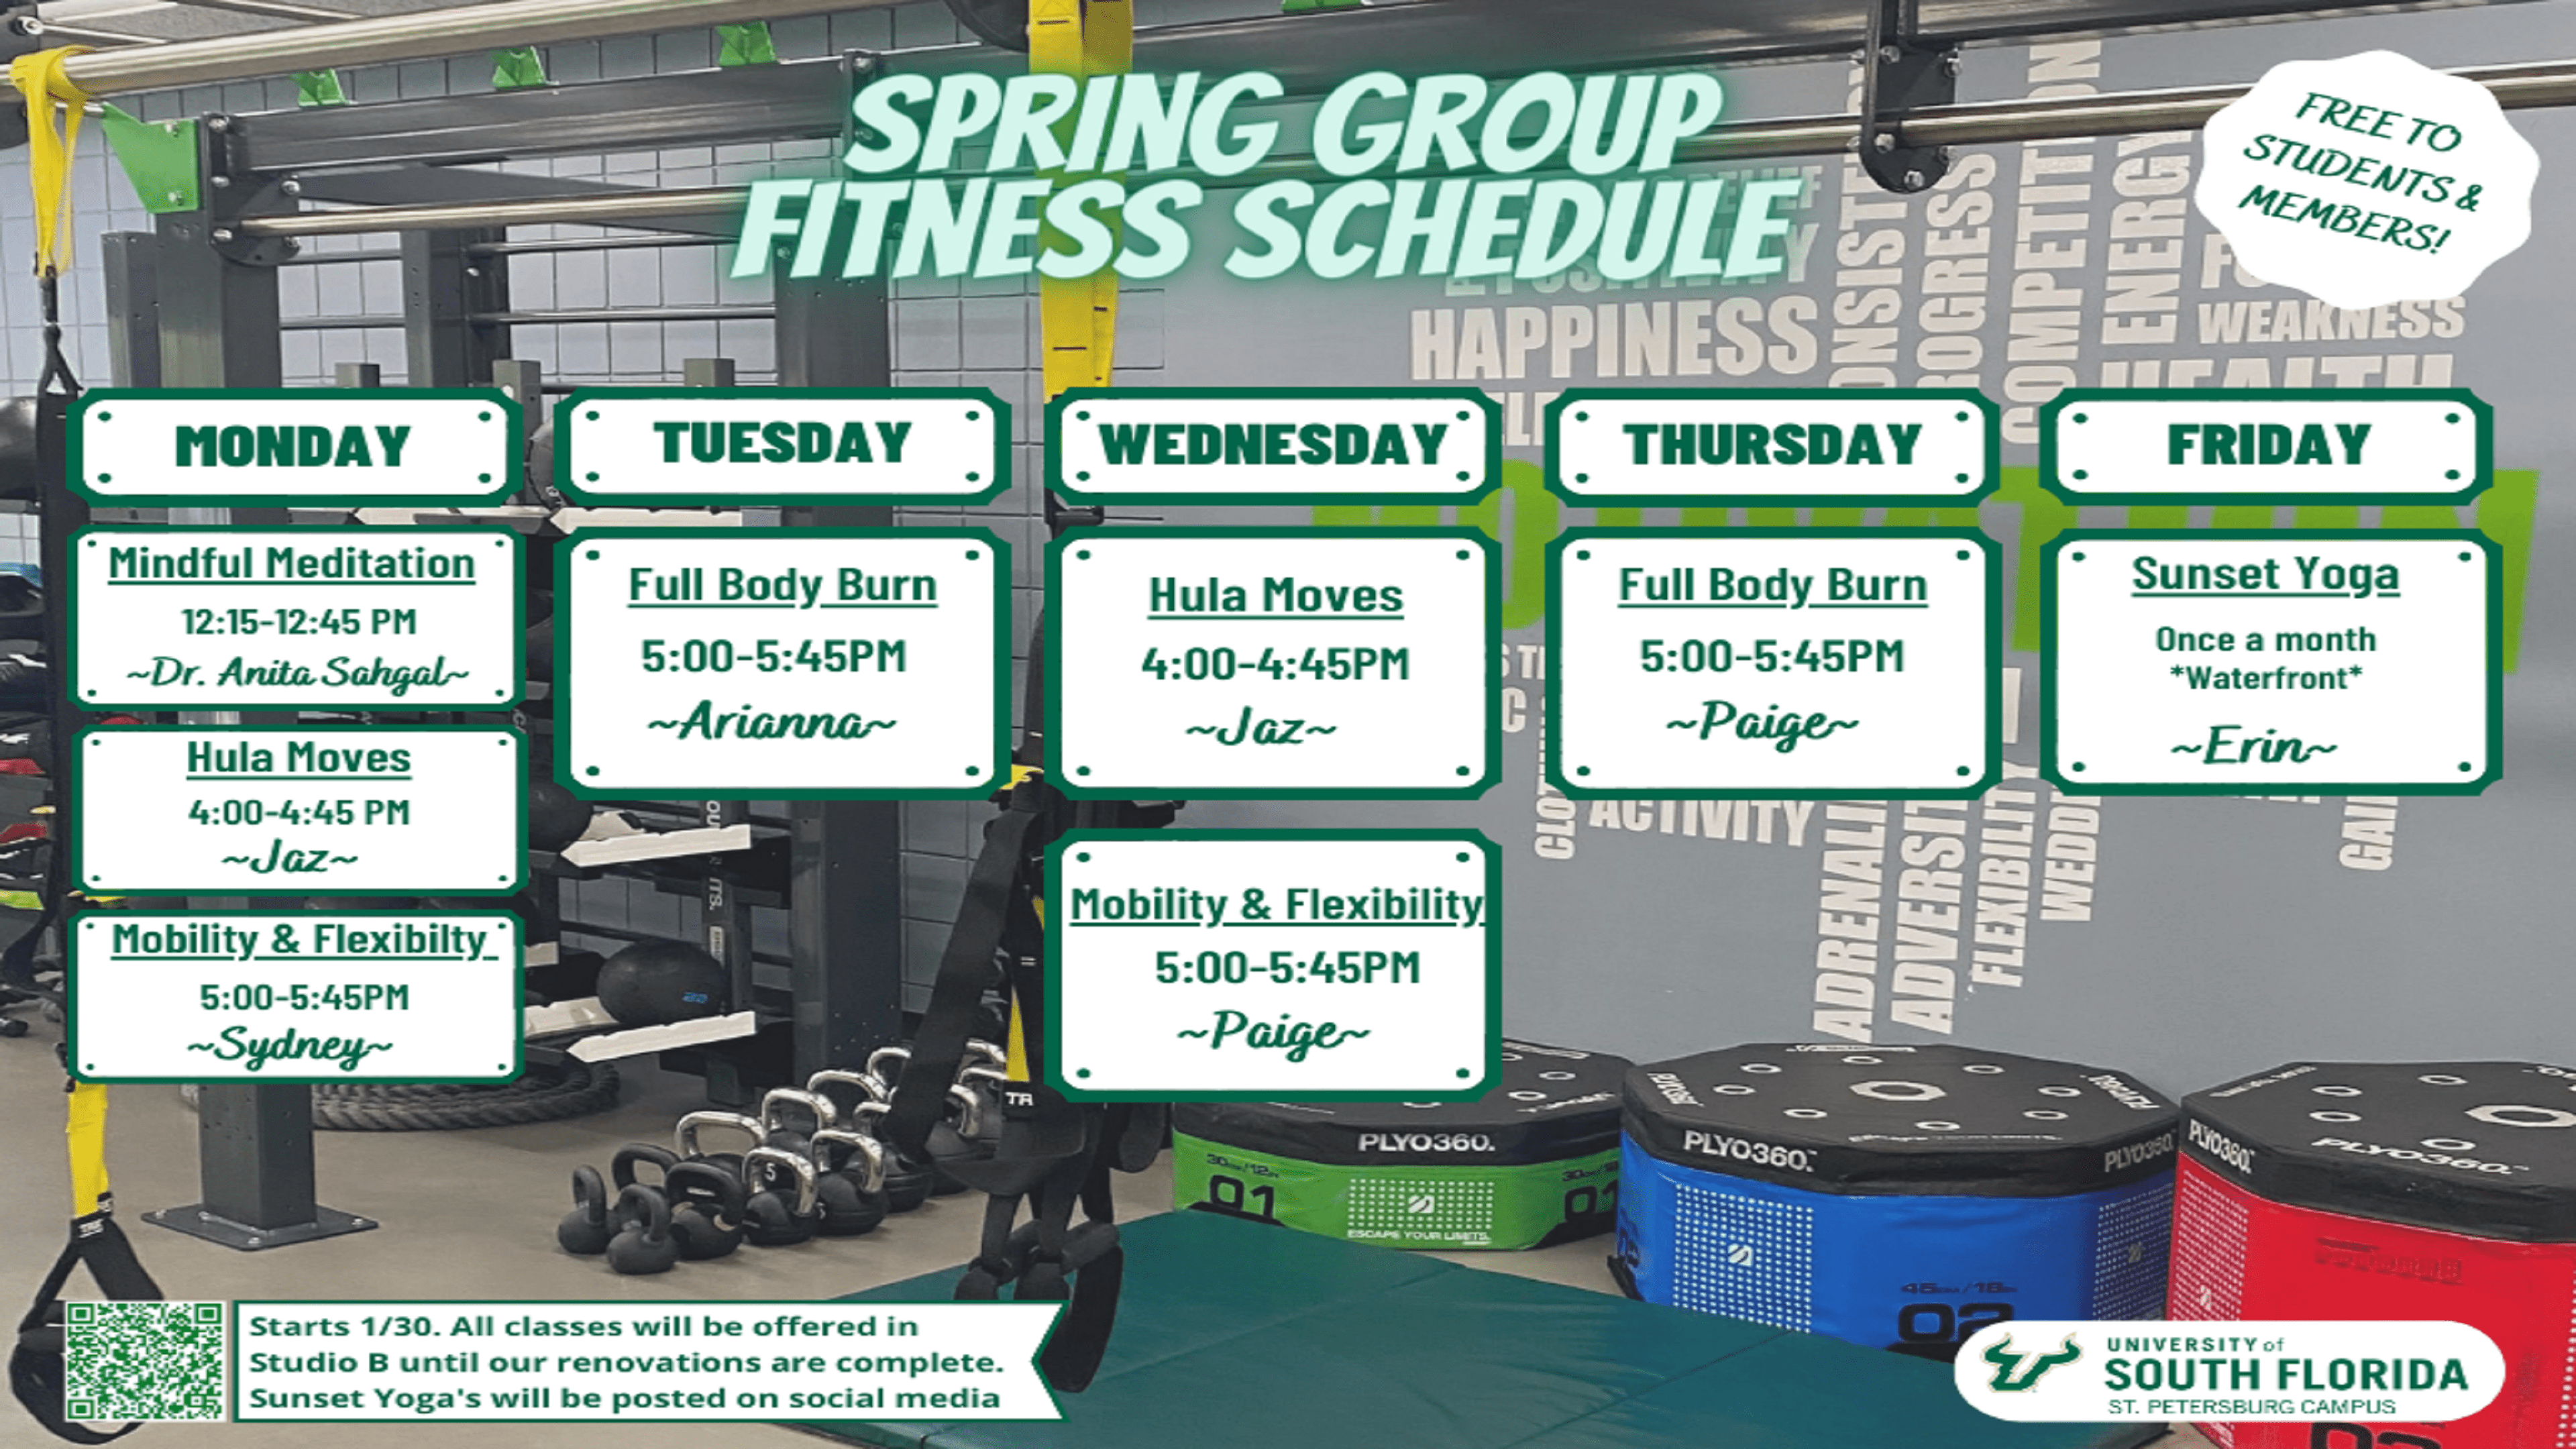 Summer Group Fitness Schedule